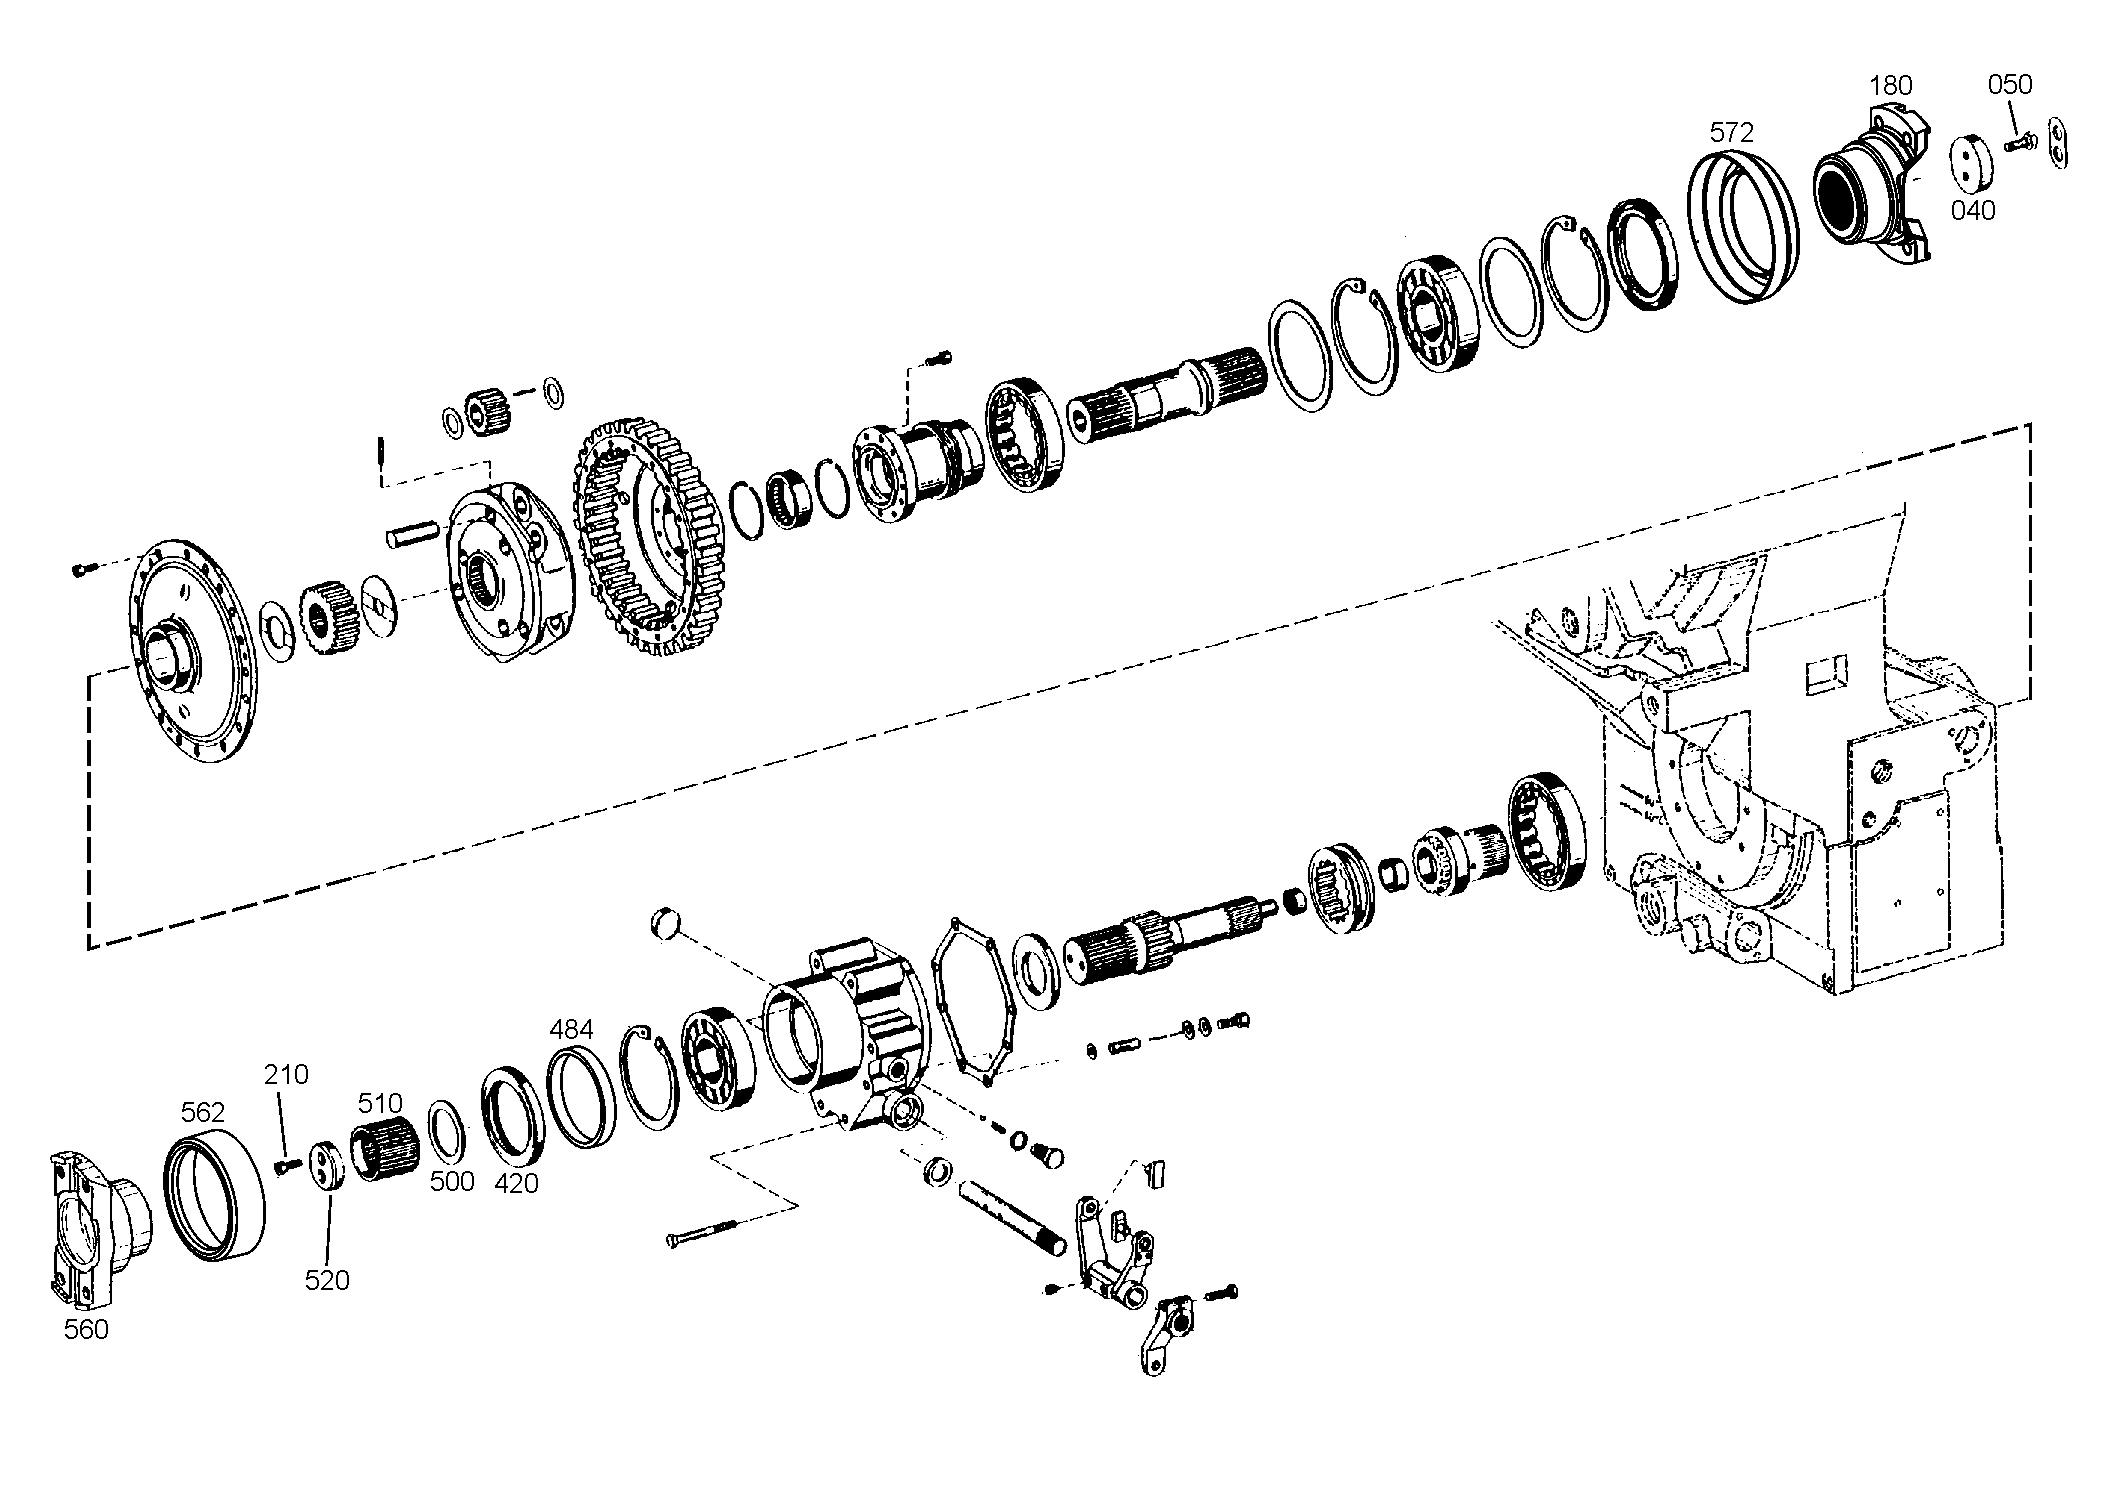 drawing for TEREX EQUIPMENT LIMITED 09398133 - WASHER (figure 1)